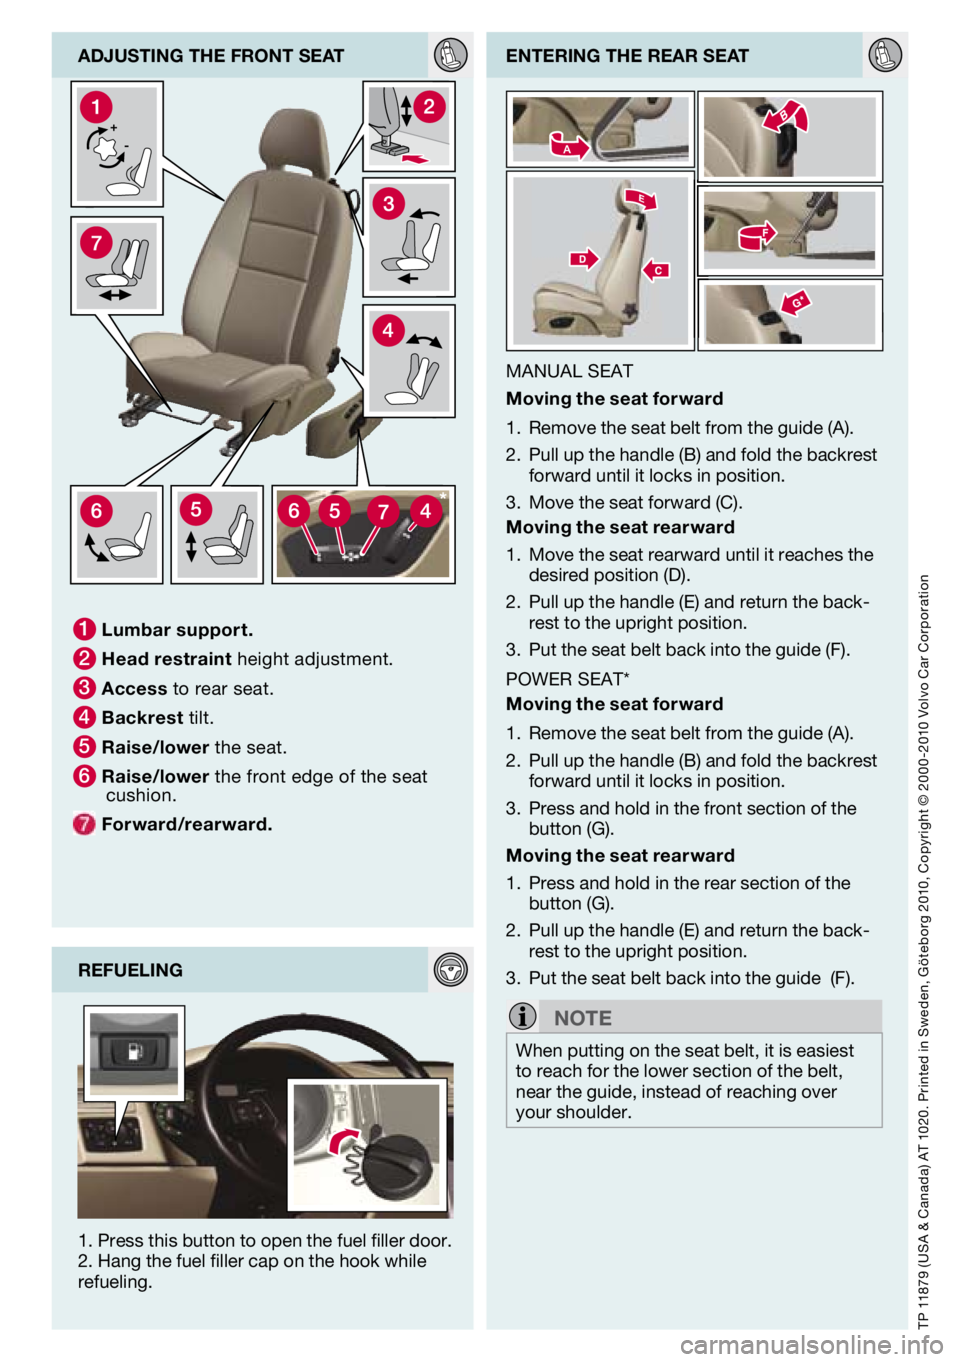 VOLVO C30 2012  Quick Guide 
TP 11879 (Usa & Canada)  aT 1020. Printed in  sweden,  göteborg 2010, Copyright © 2000 -2010  volvo Car Corporation
enterIng the rear seat
MaNUal seaT
m oving the seat forward
remove the seat belt 